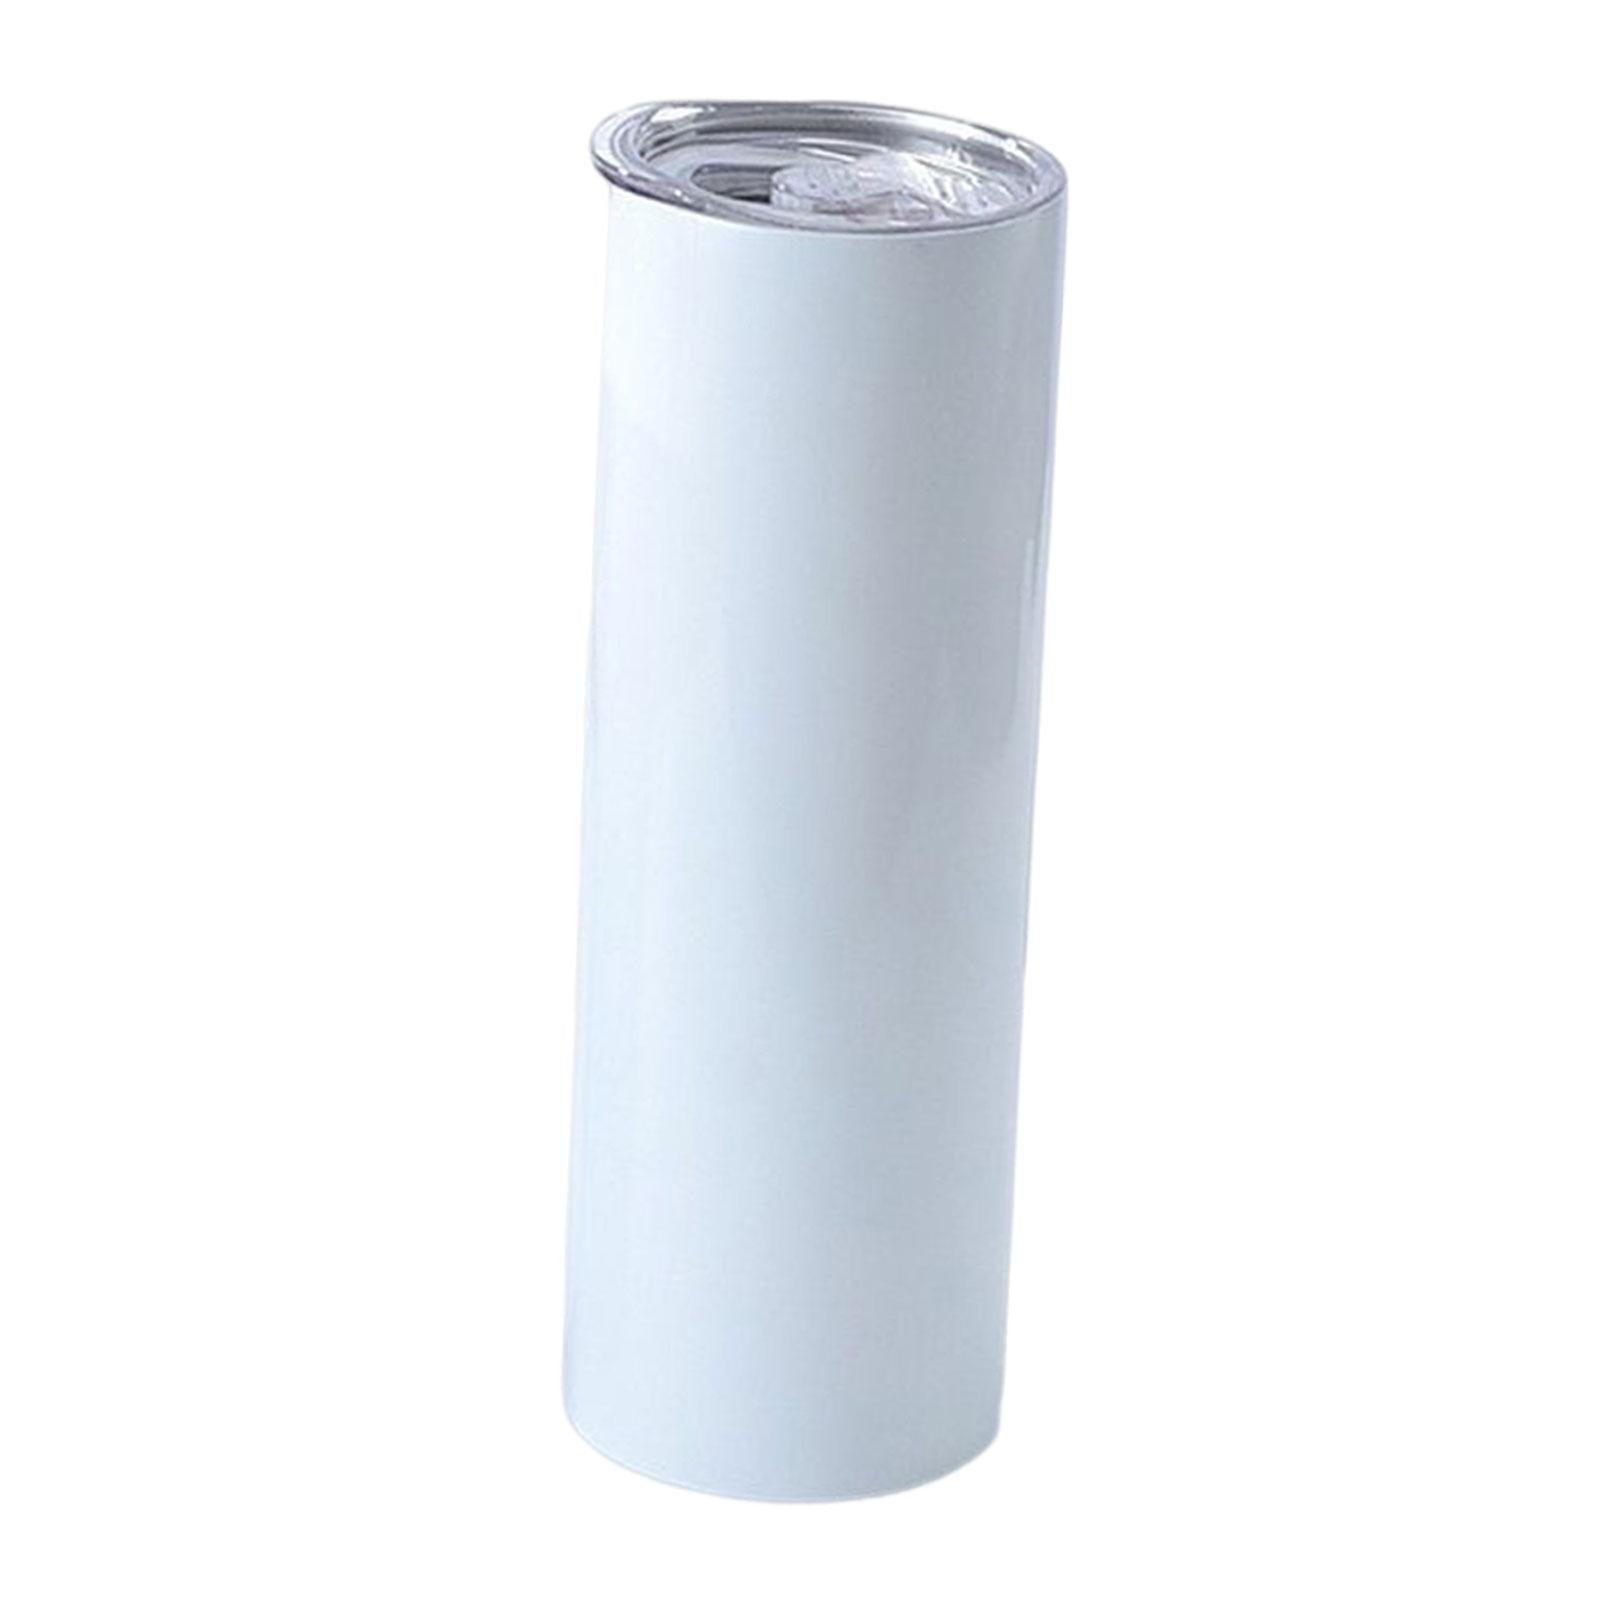 USA CA Warehouse Wholesale Bulk 20oz 20 oz Straight Skinny Stainless Steel  Insulated Blank Sublimation Tumblers Cups with Straw 905